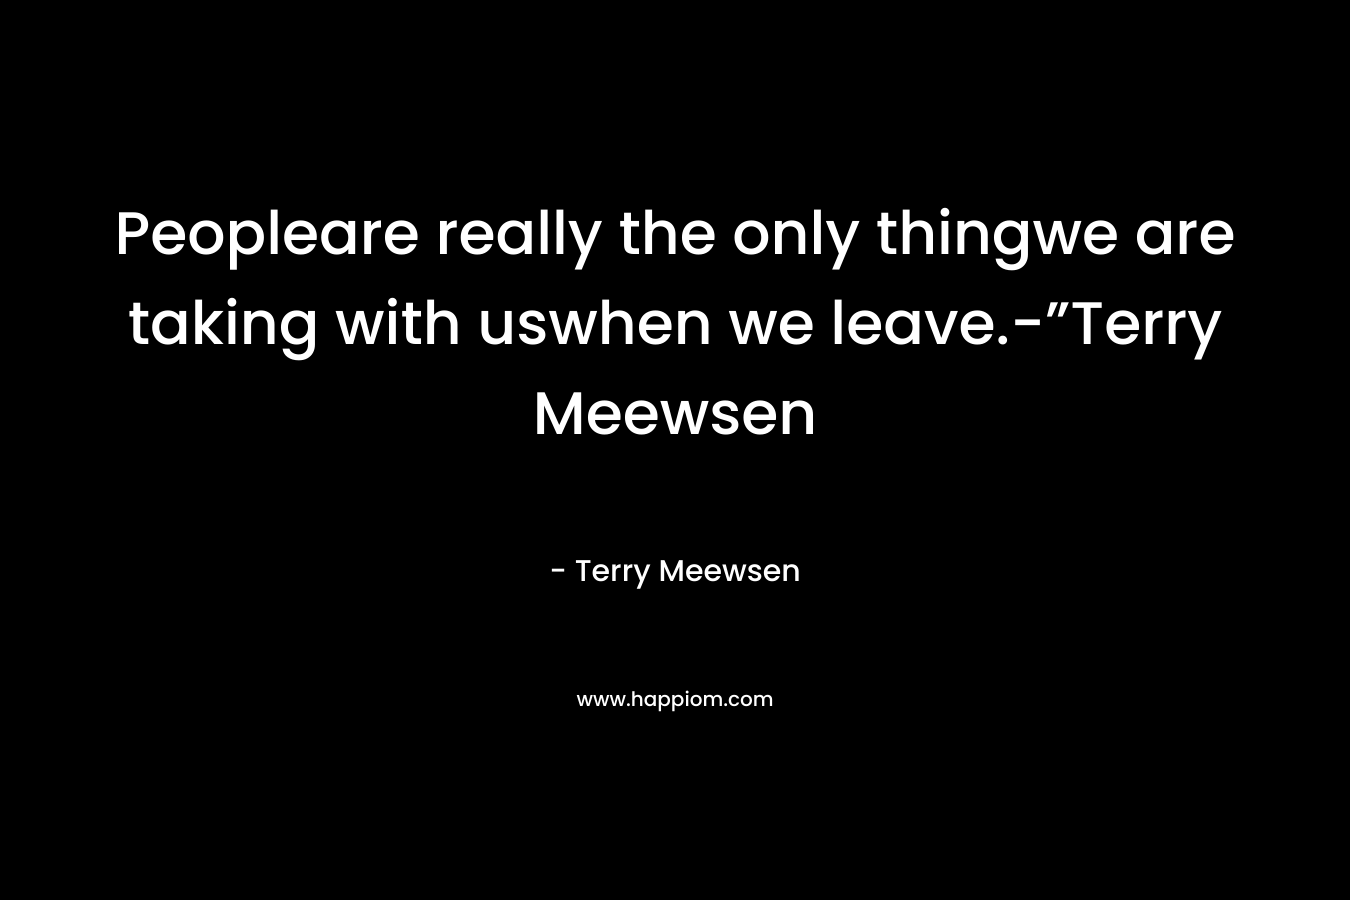 Peopleare really the only thingwe are taking with uswhen we leave.-”Terry Meewsen